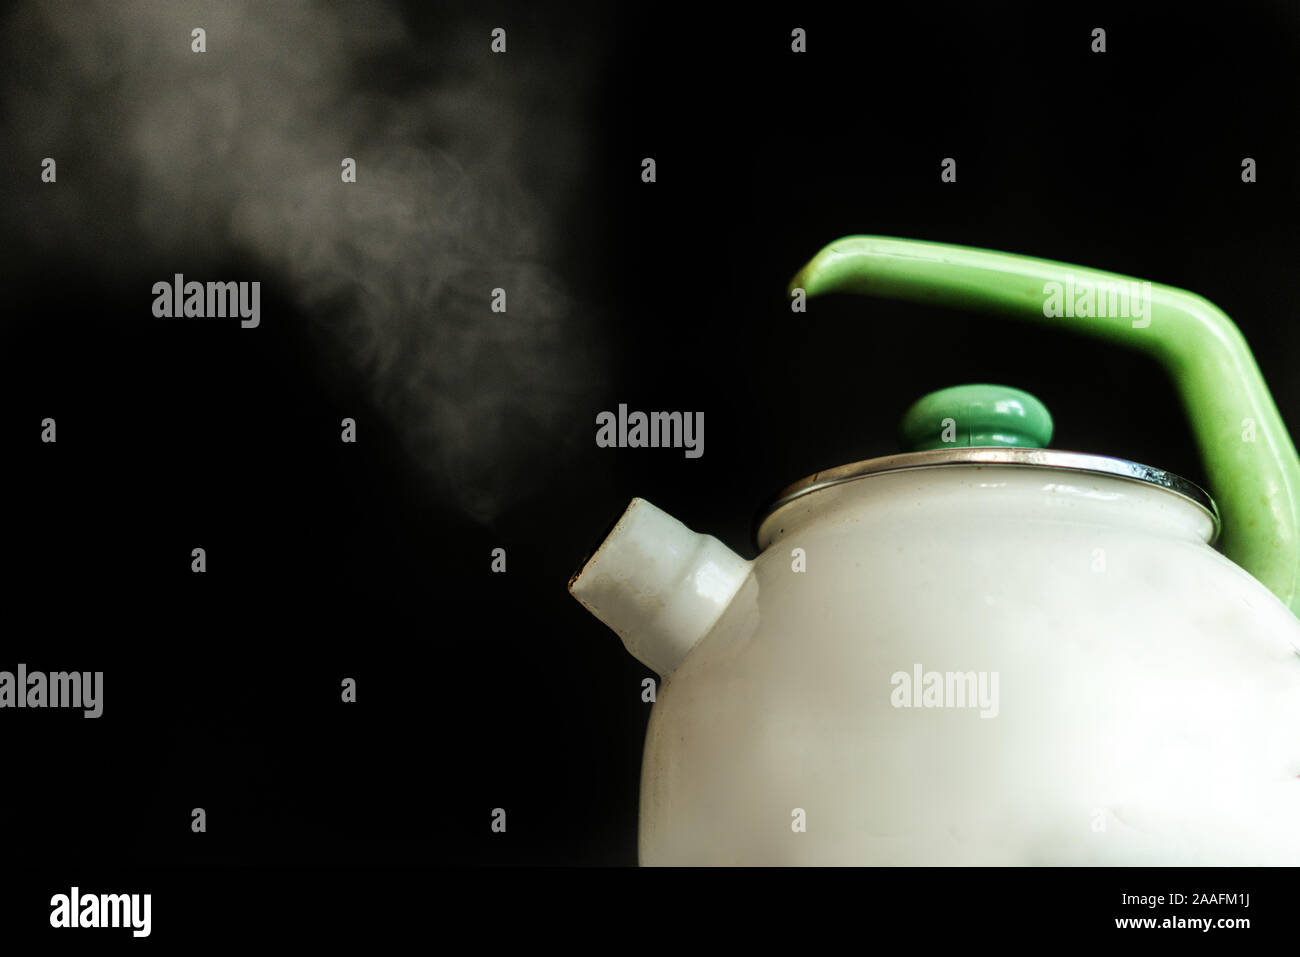 https://c8.alamy.com/comp/2AAFM1J/the-kettle-with-hot-boiling-water-and-the-steam-comes-out-from-it-on-dark-backgrounds-2AAFM1J.jpg